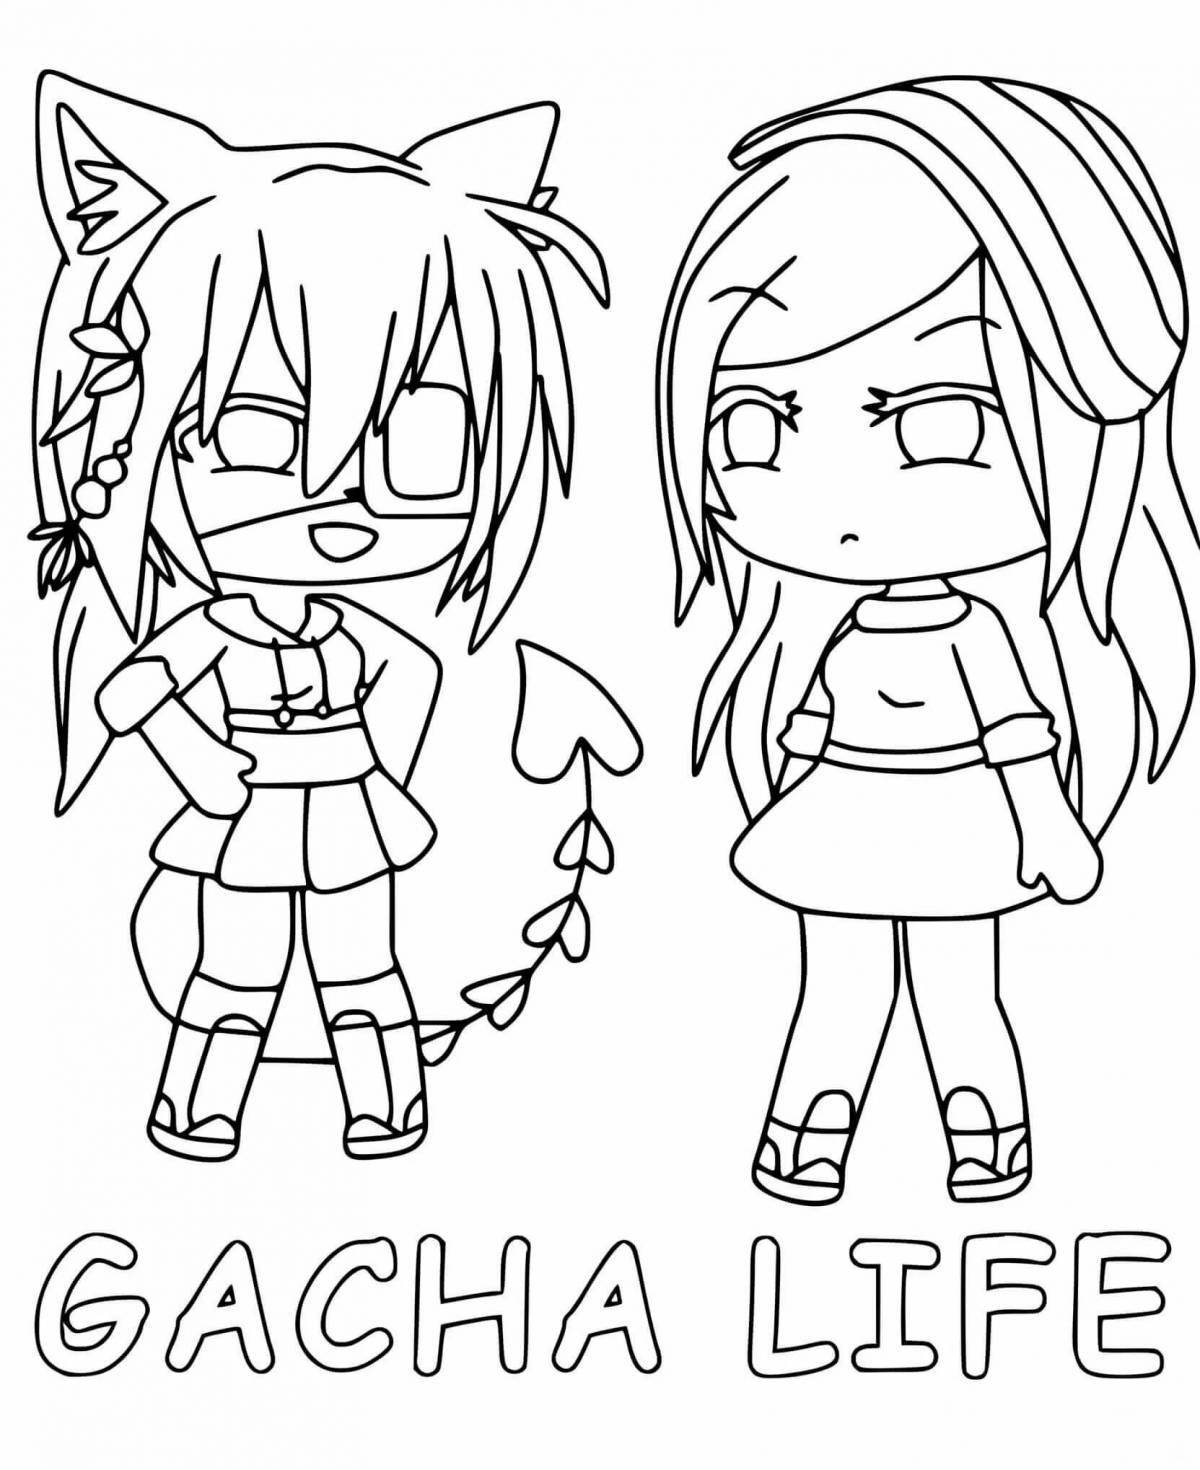 Colorful gacha club coloring page